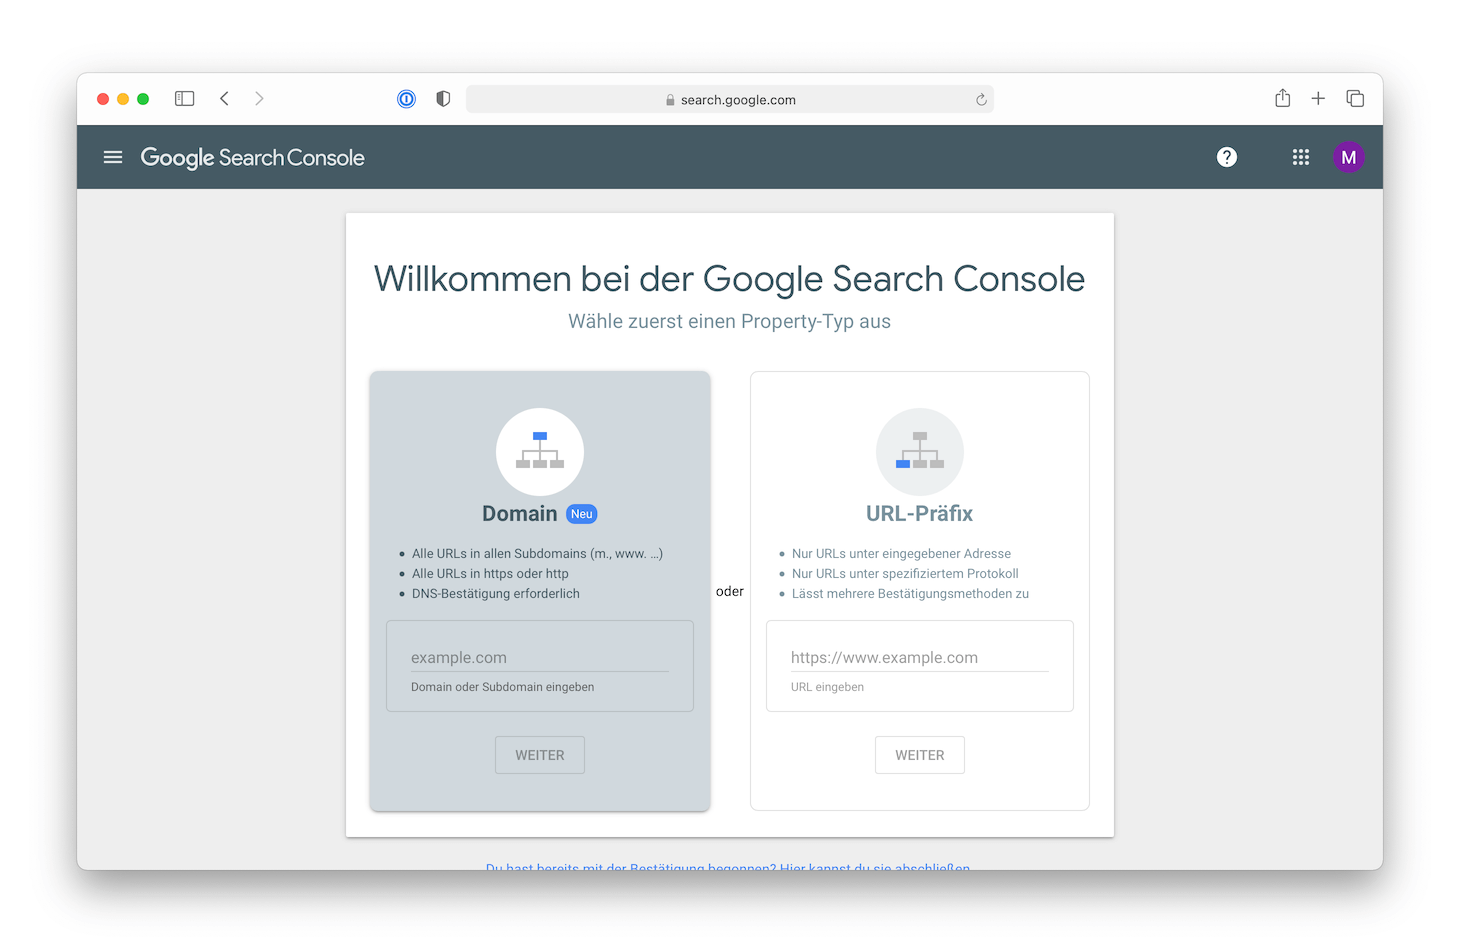 Screenshot Google Search Console Wahl des Property Typs